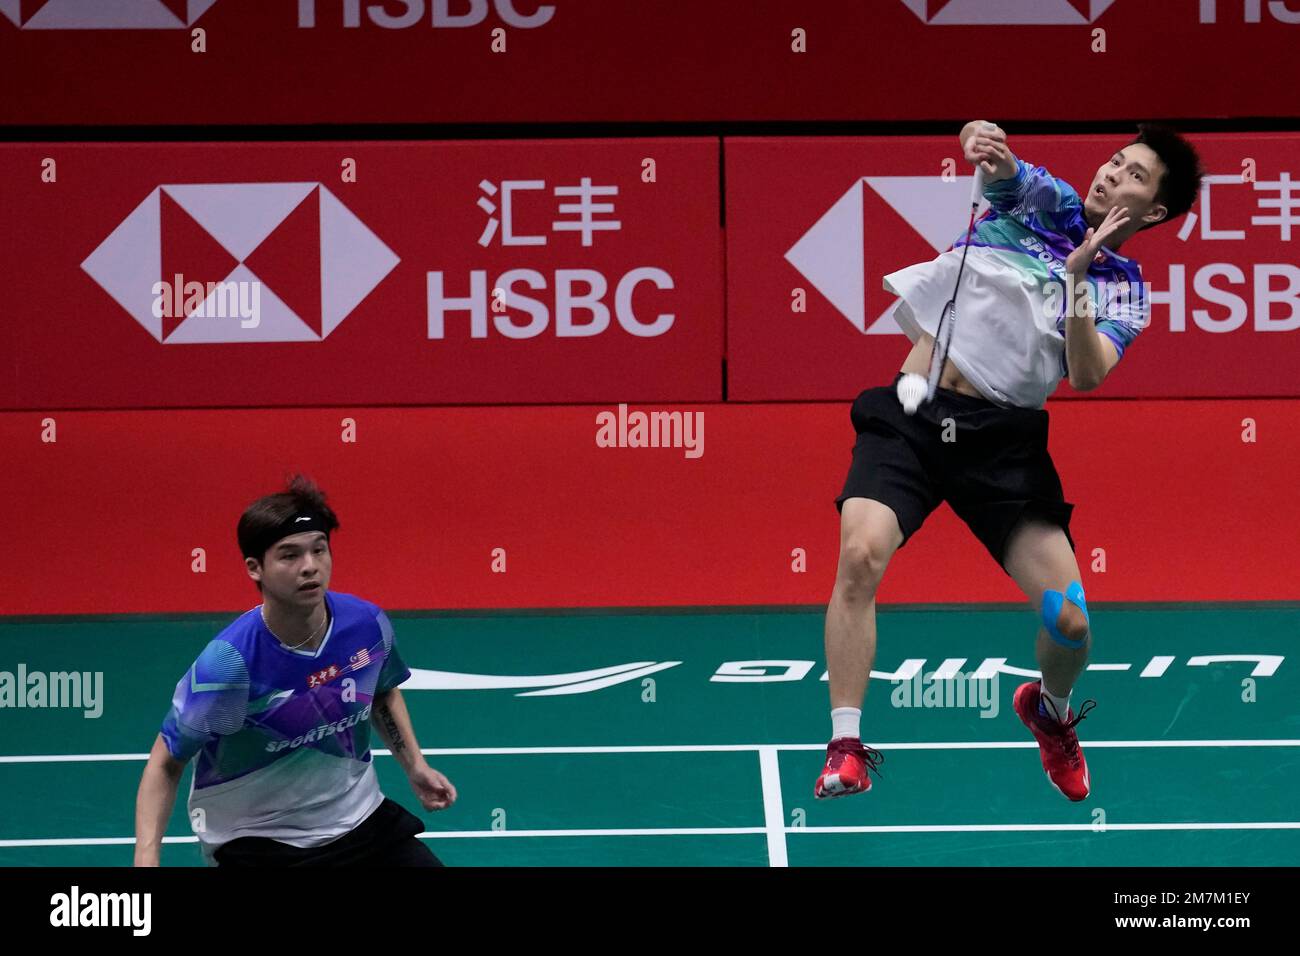 Malaysias Ong Yew Sin, right, and Teo Ee Yi compete against Indonesias Fajar Alfian, and Muhammad Ardianto during their mens doubles Group A badminton match at the BWF World Tour Finals in